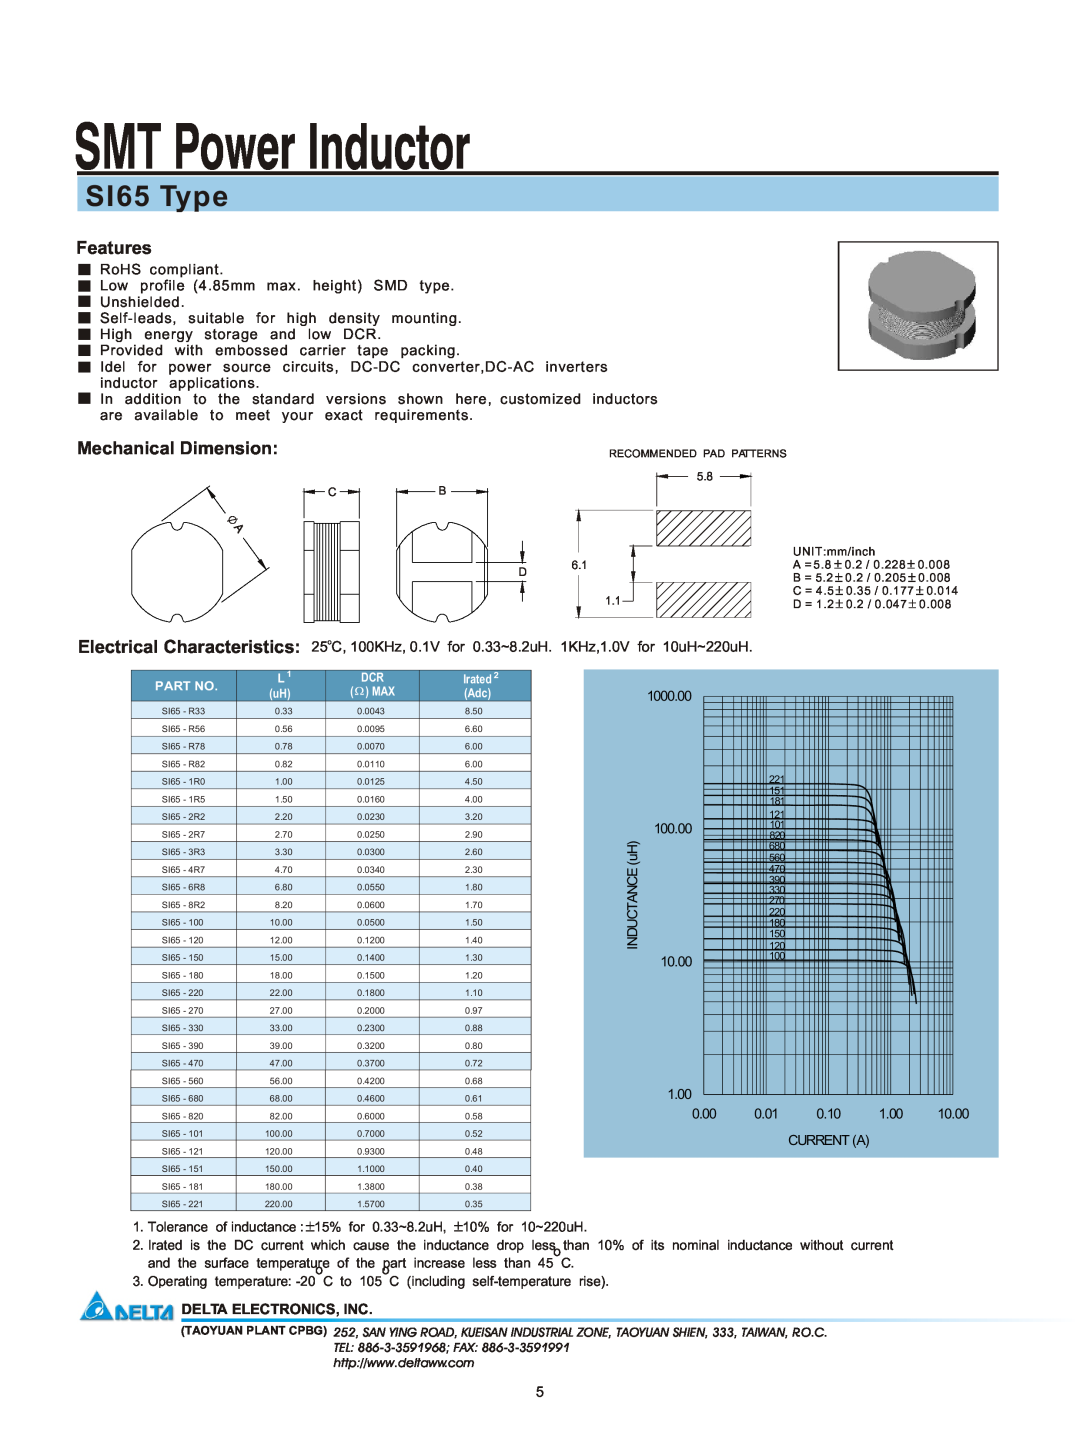 Delta Electronics manual SMT Power Inductor, SI65 Type, Features, Mechanical Dimension, Delta Electronics, Inc 